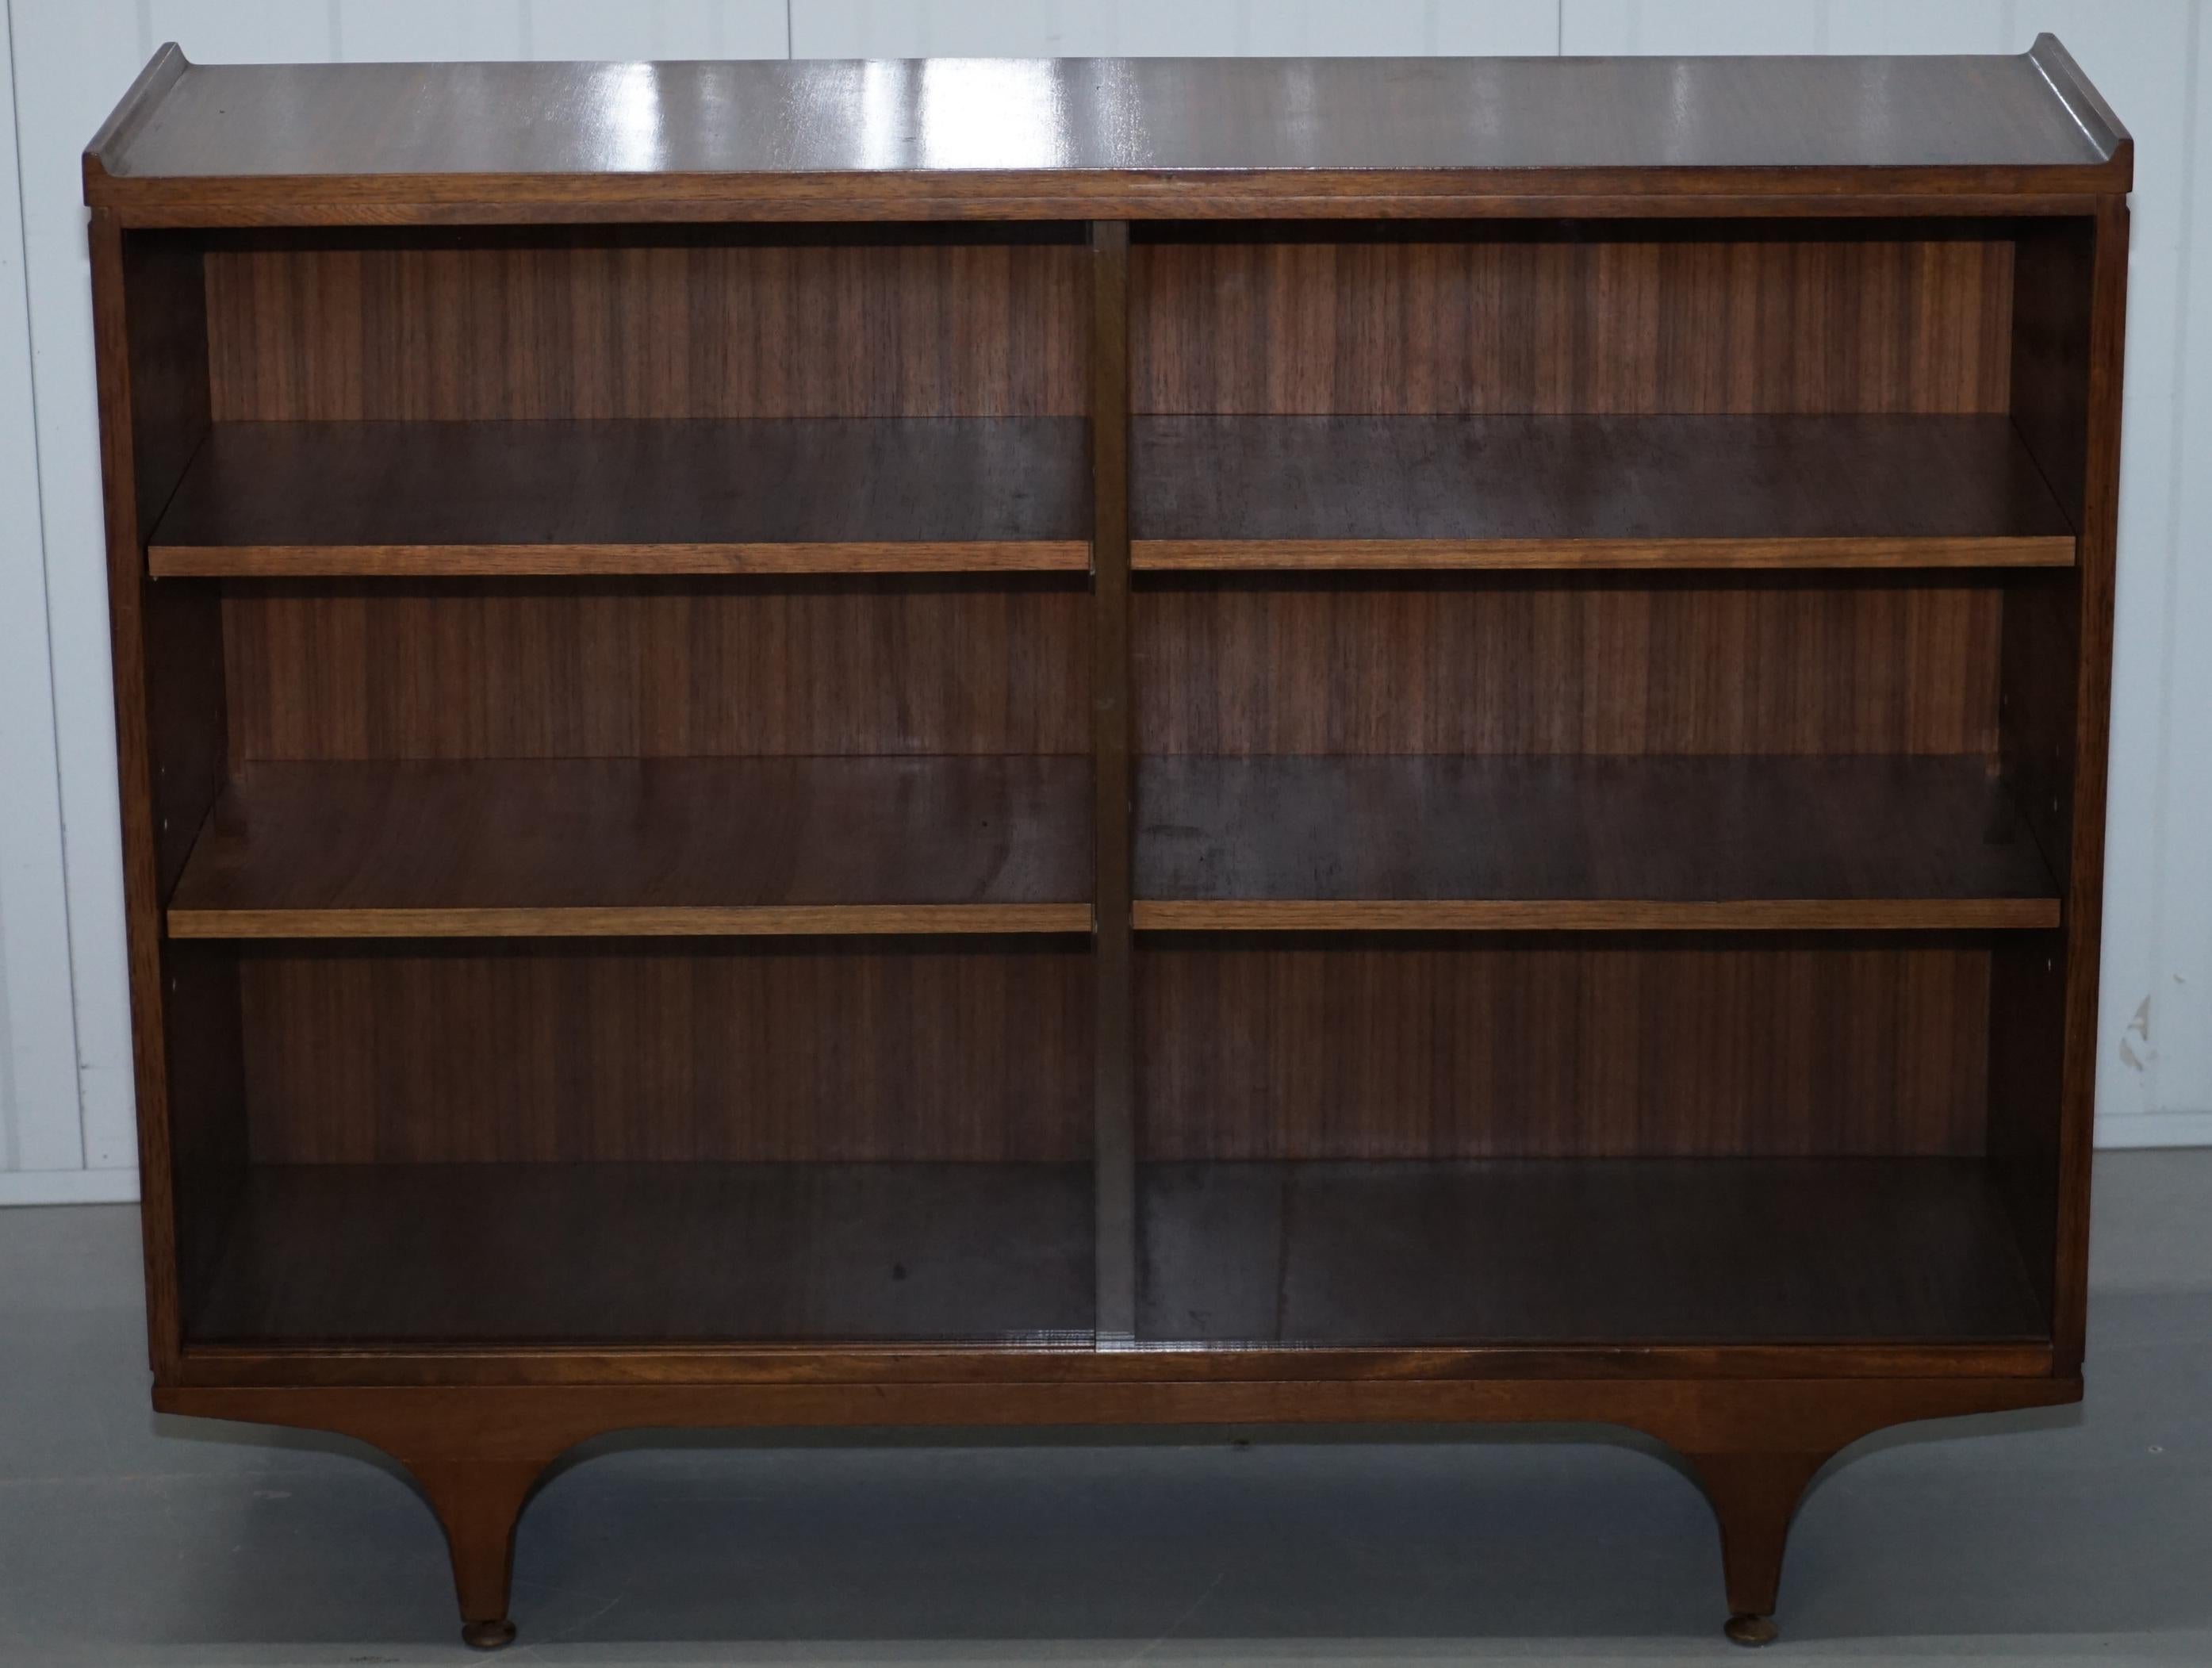 British Pair of Sculpted Mid-Century Modern Teak Bookcases with Glass Sliding Doors